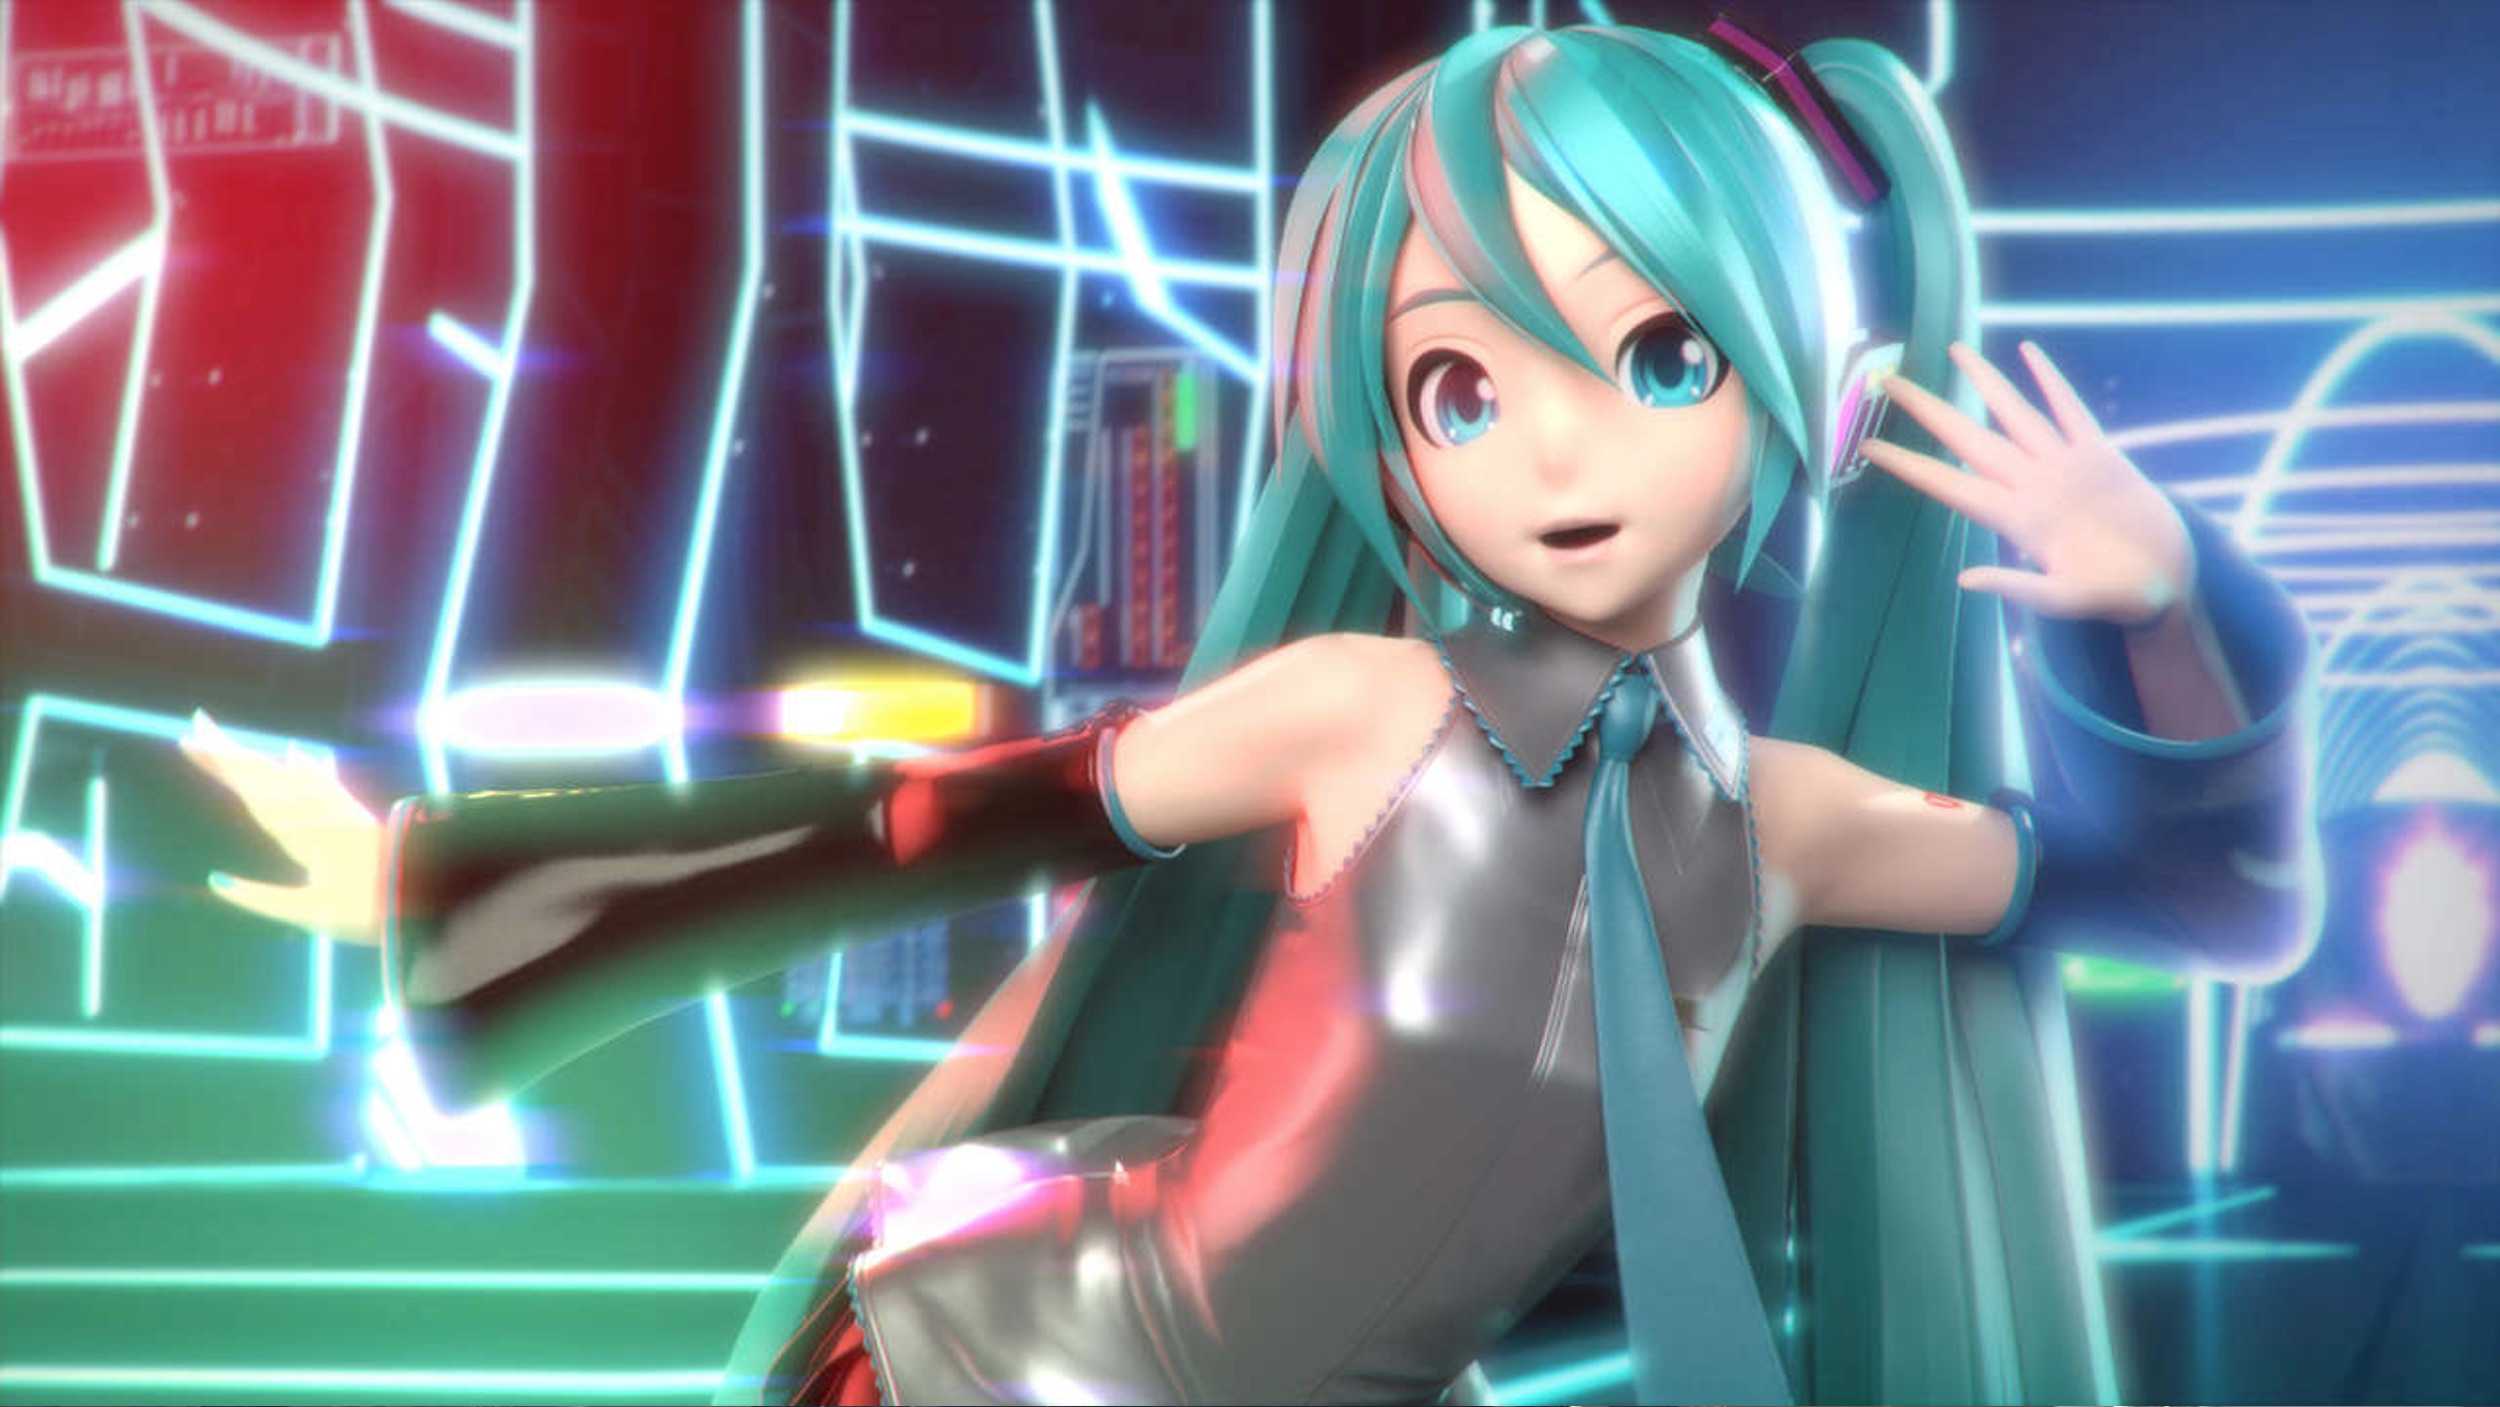 Join Hatsune Miku Live In Concert With Playstation And Hatsune Miku Vr